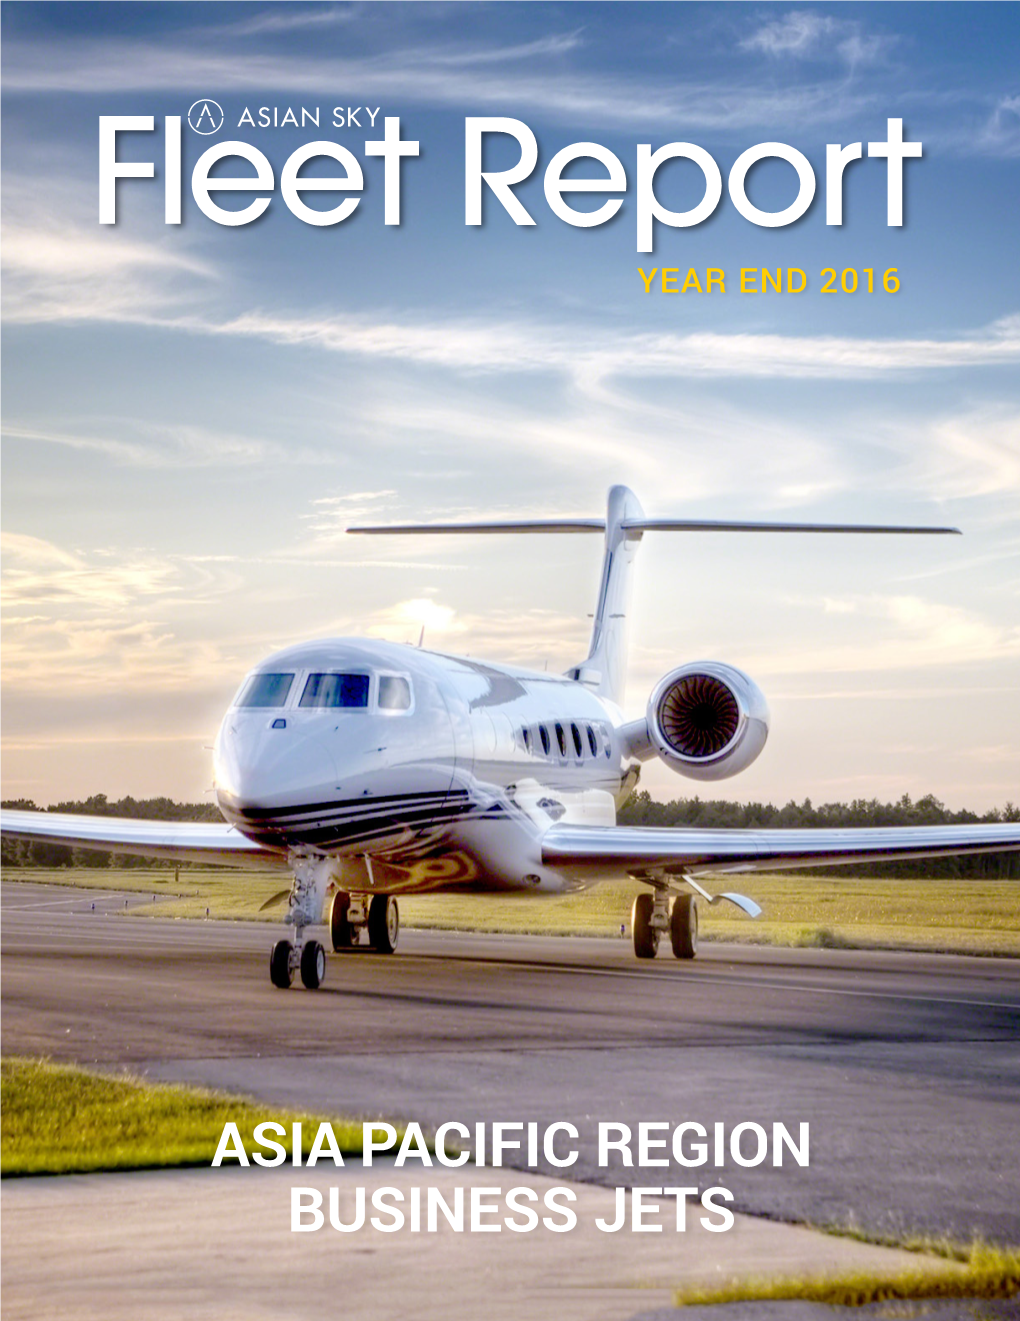 Asia Pacific Region Business Jets